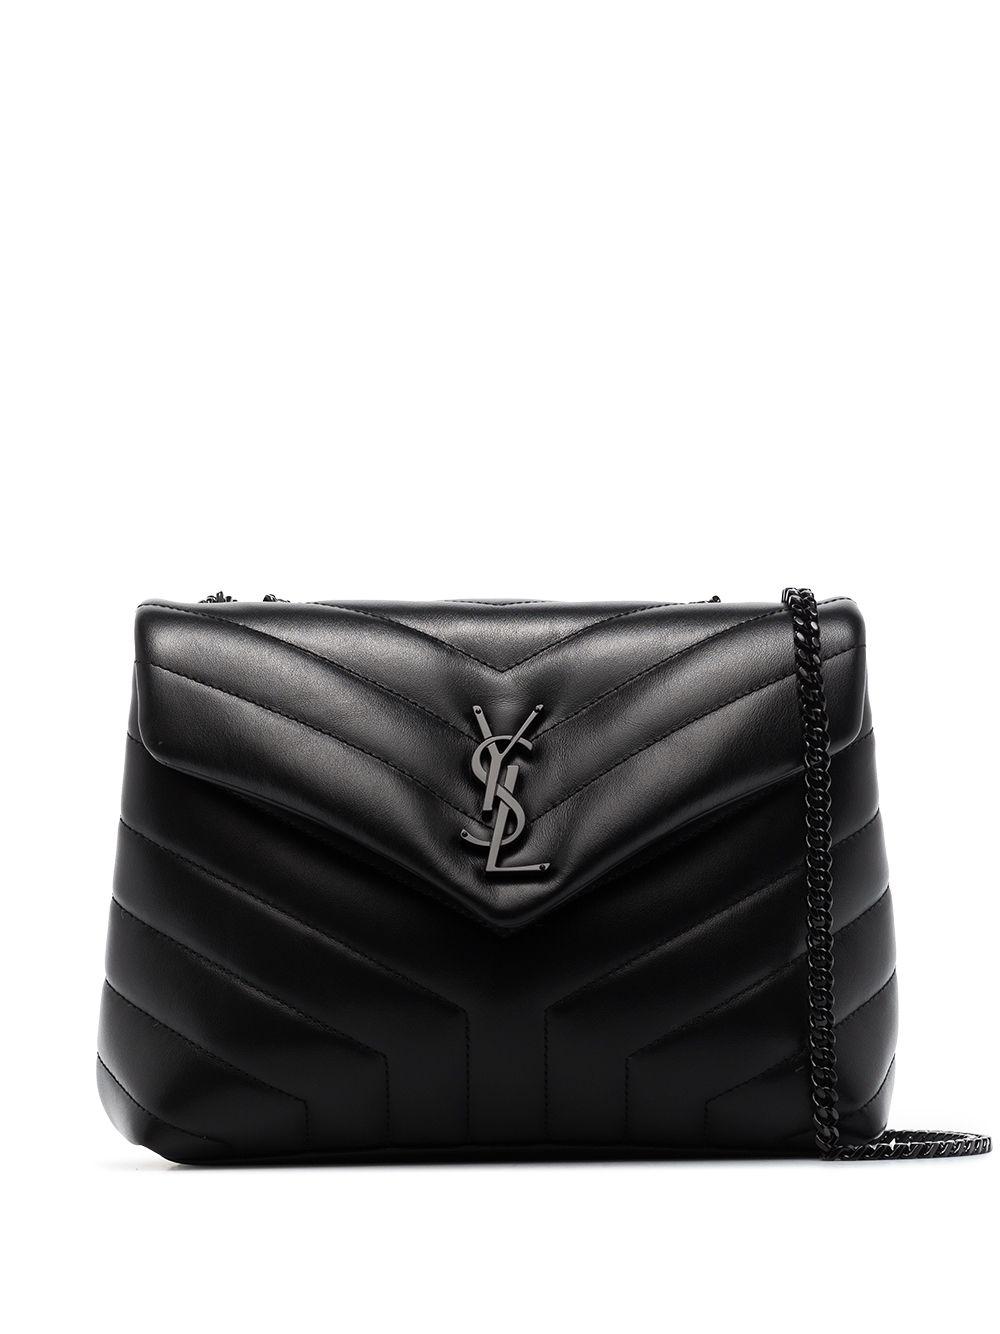 Saint Laurent Loulou Small Chain Bag In Quilted y Leather in Black